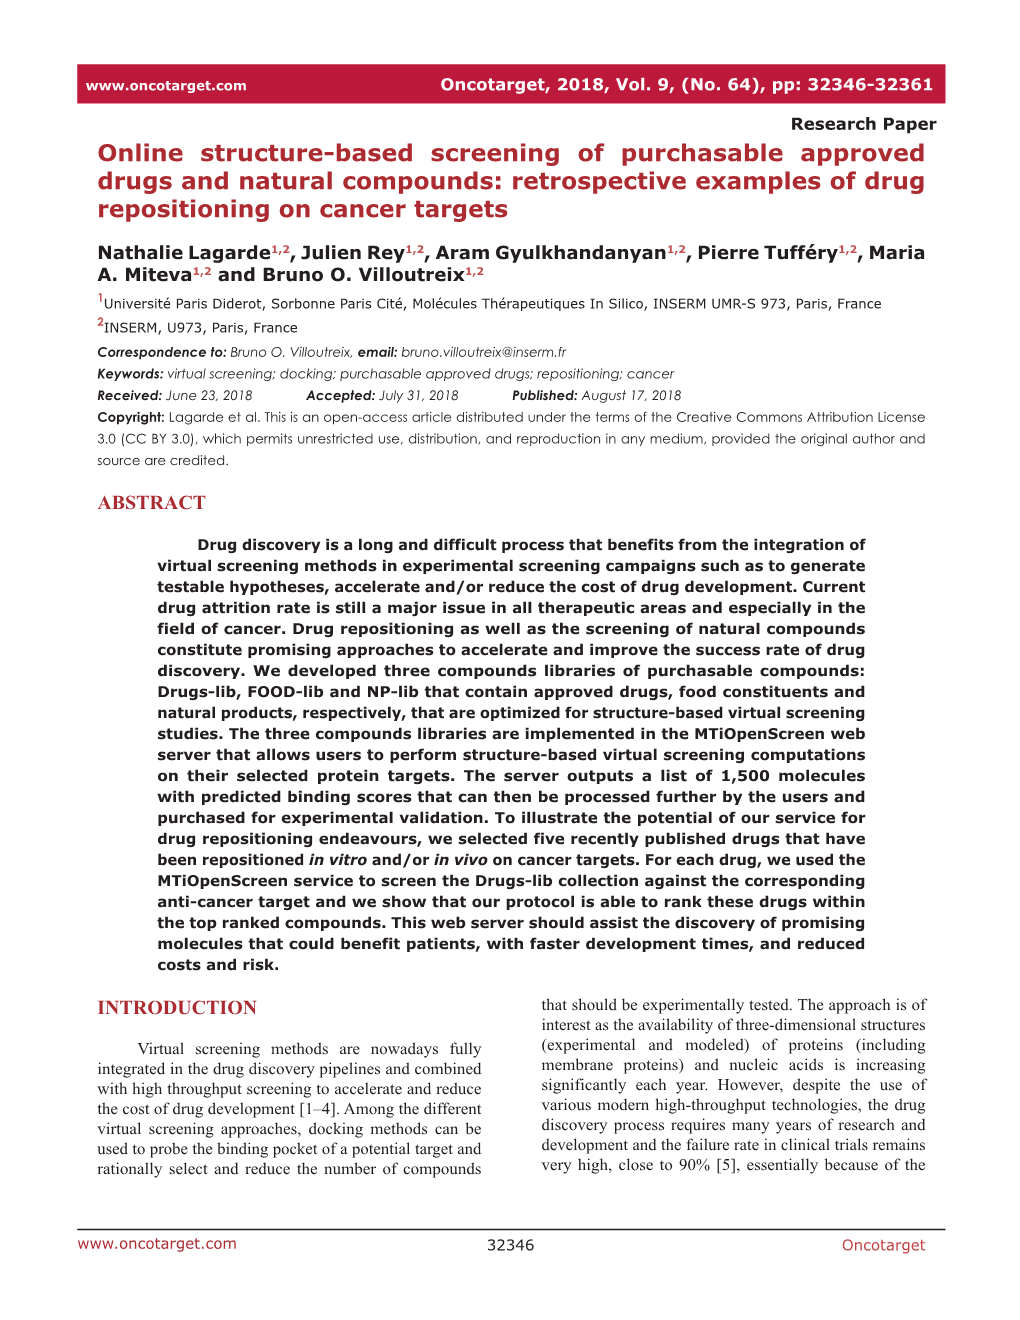 Online Structure-Based Screening of Purchasable Approved Drugs and Natural Compounds: Retrospective Examples of Drug Repositioning on Cancer Targets